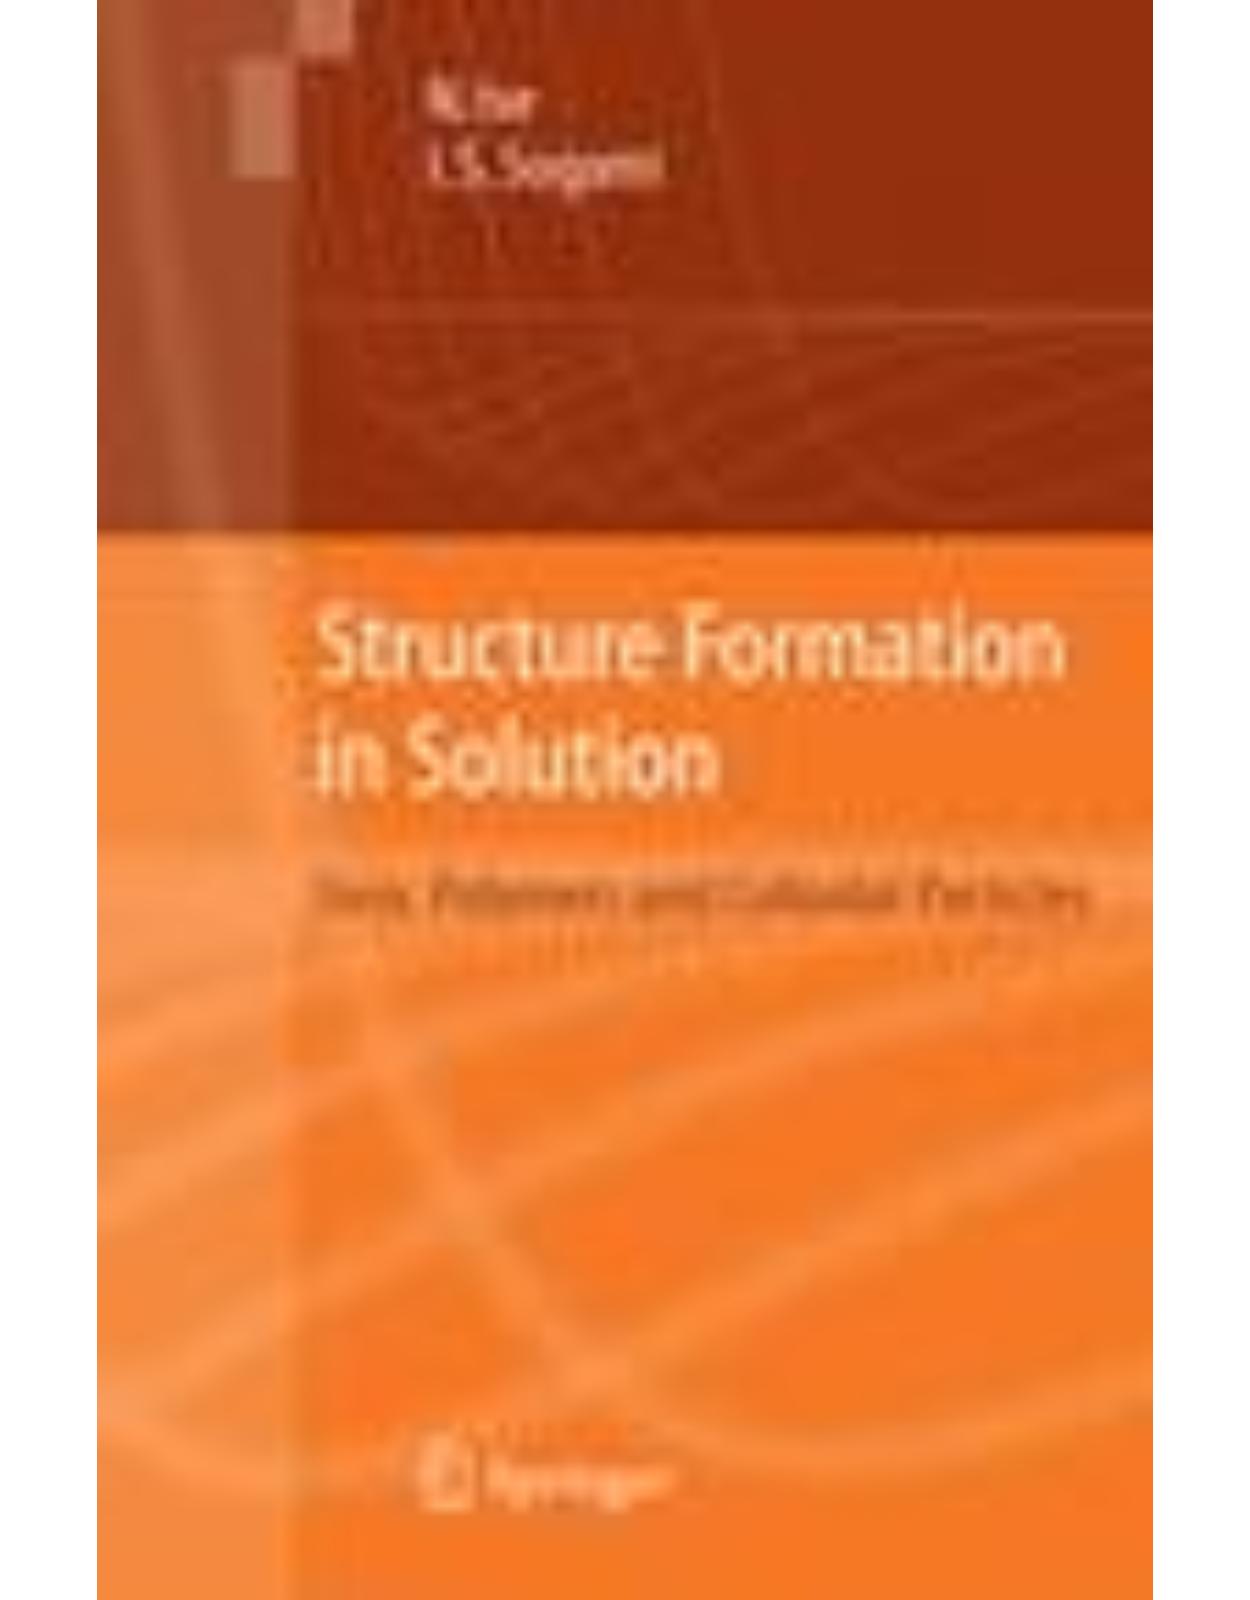 Structure Formation in Solution